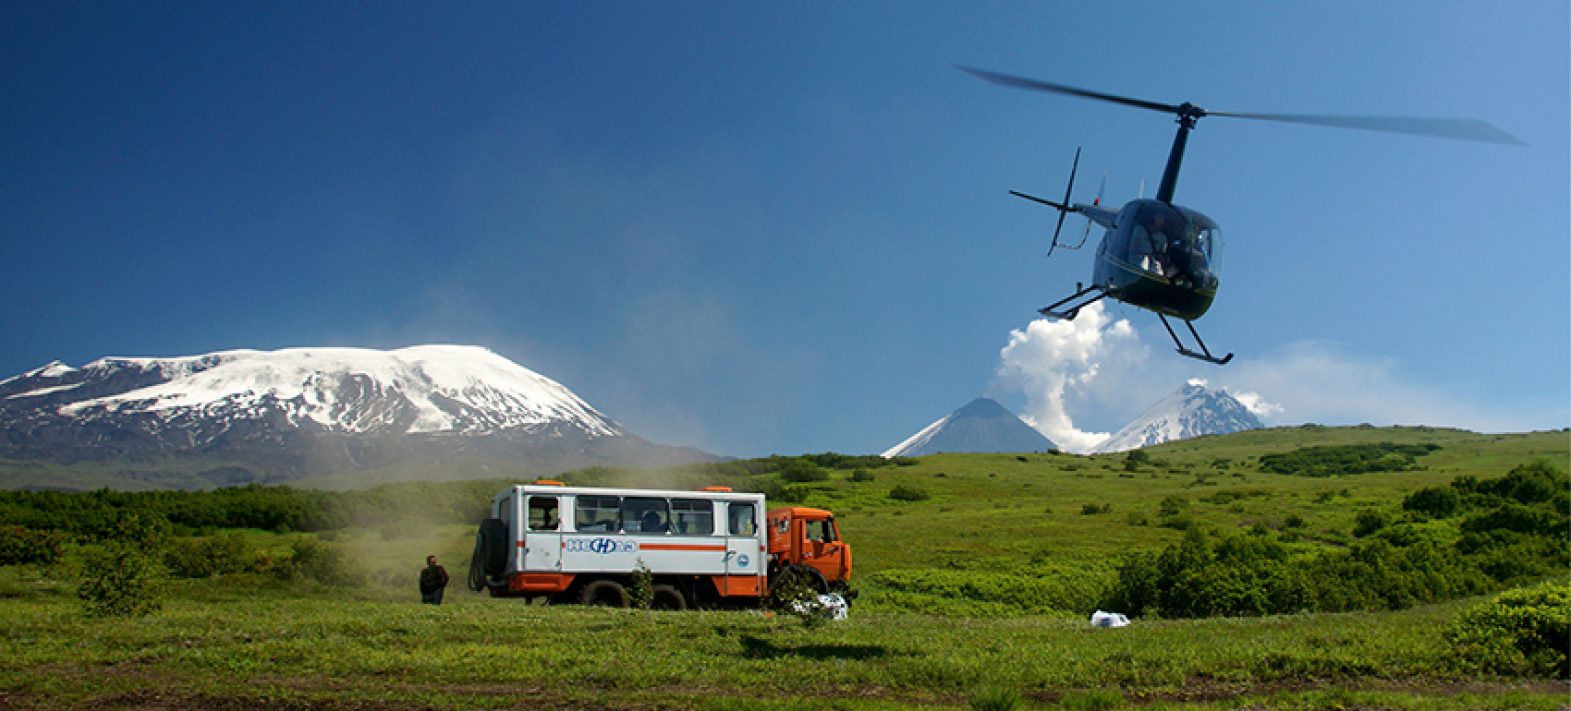 A large-scale geophysical campaign to study the giant volcanoes of Kamchatka in Russia